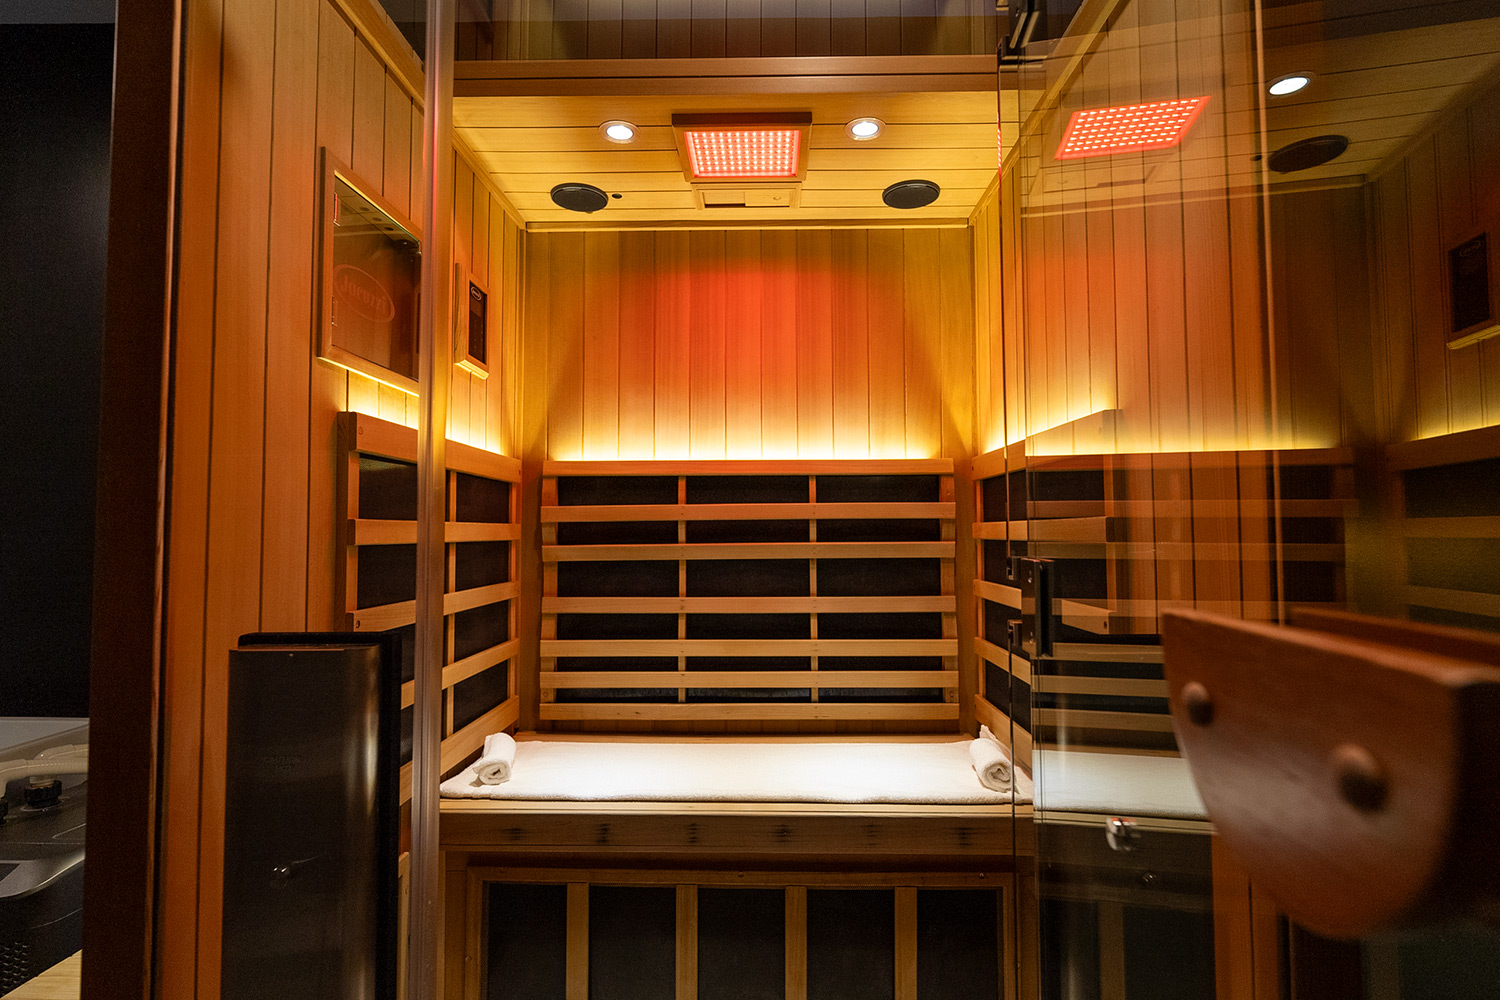 Our infrared sauna - half of the fire and ice experience.